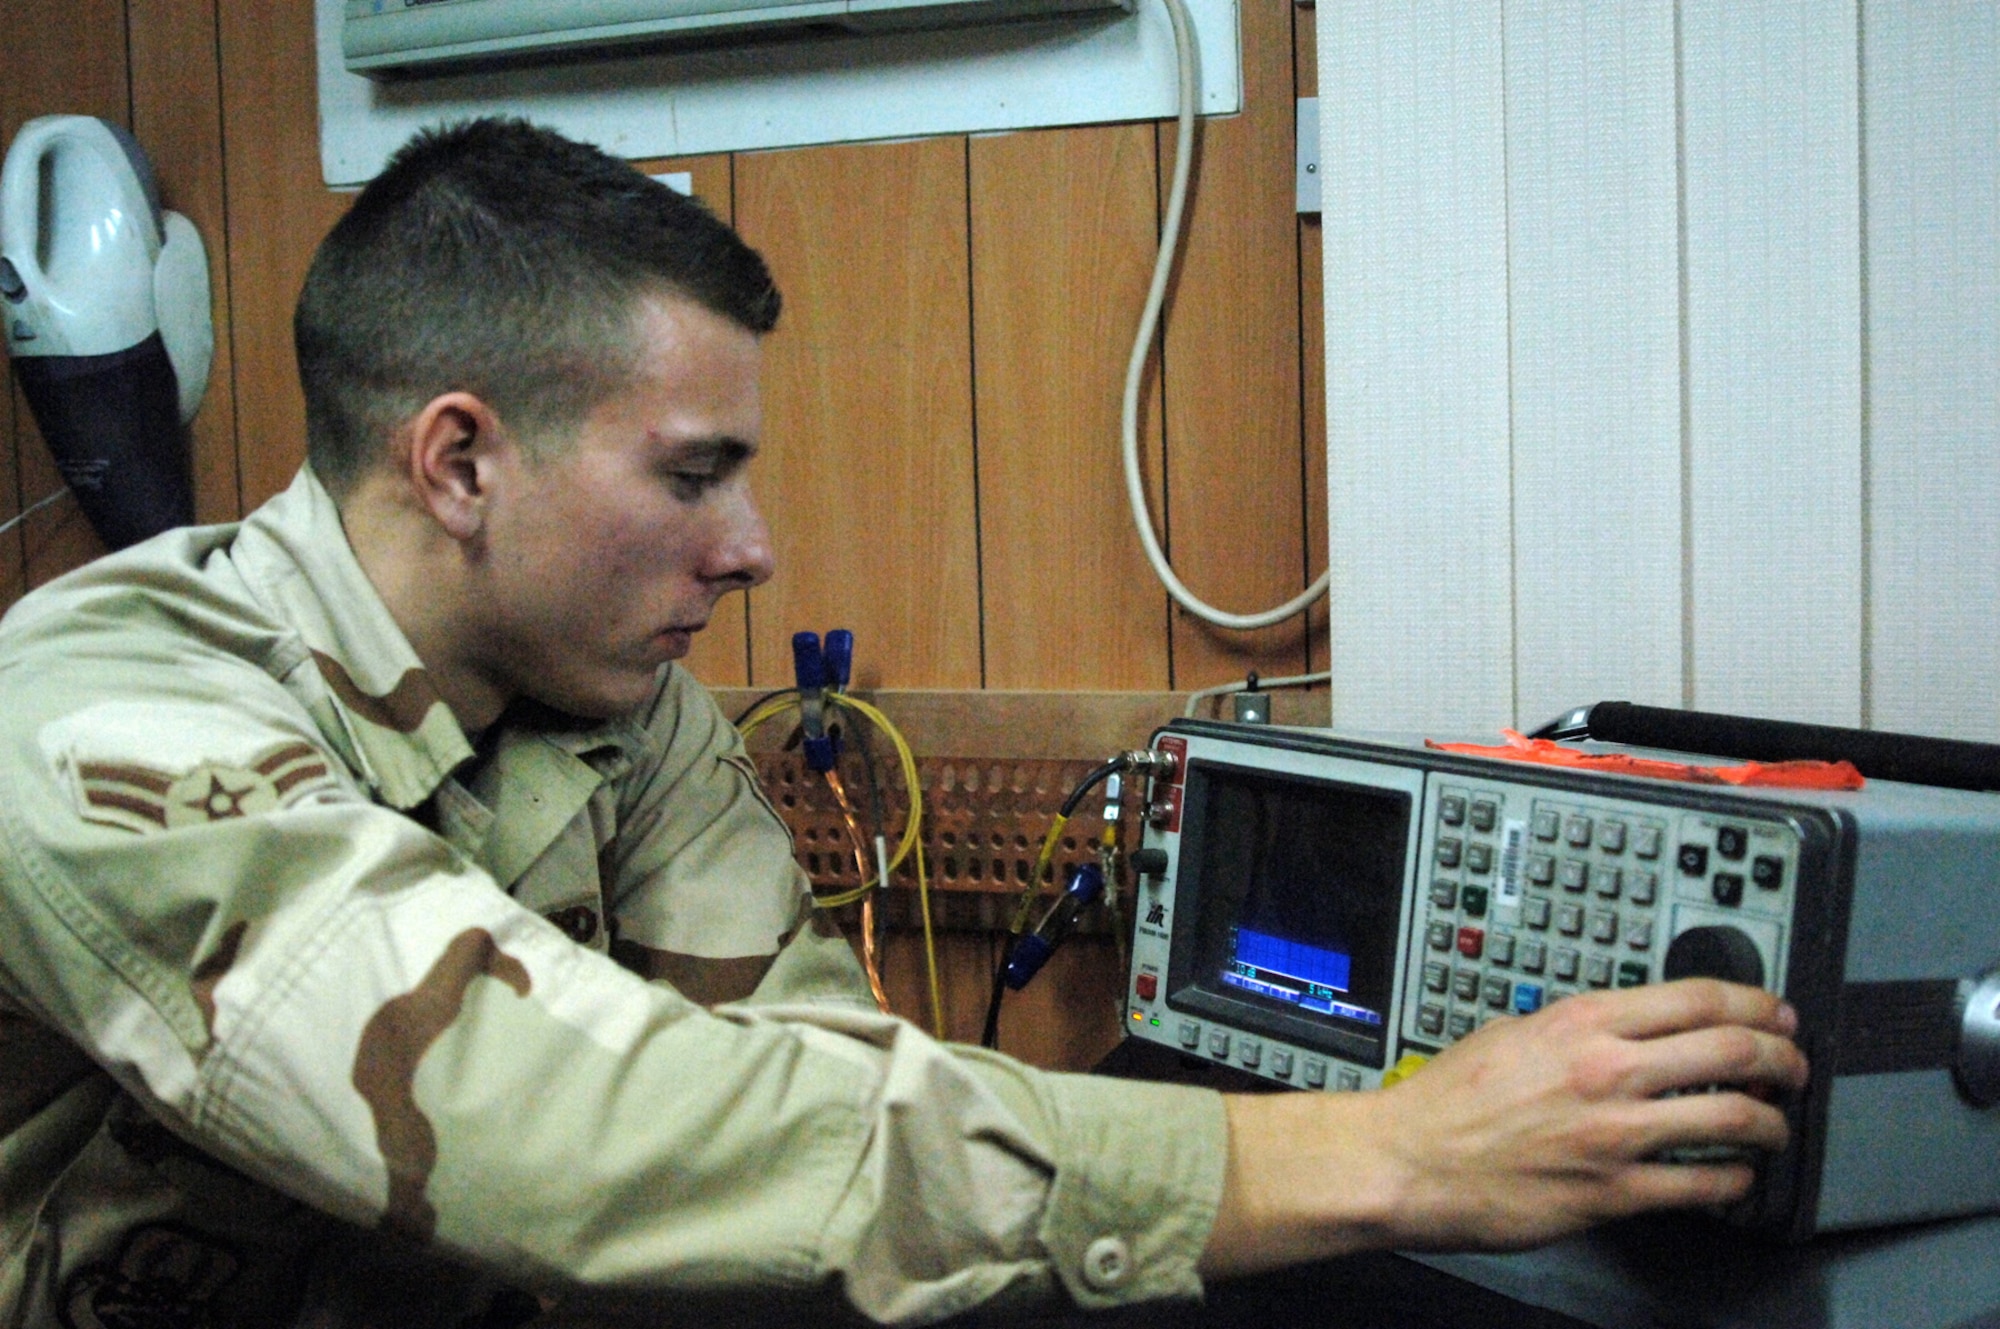 Balad Air Base, Iraq - Airman First Class Nicholas Chase, a satellite wideband and radio maintenance technician, monitors a radio test set to ensure radar controllers' have clear communication with aircrew flying over Iraq in support of OIF. Airman Chase is assigned to the 727th Expeditionary Air Control Squadron (EACS) and is deployed from the 728th Air Control Squadron at Eglin Air Force Base, Fla. Also known as Kingpin, the self-sustaining 727th EACS is comprised of nealry 200 Airmen from 27 different Air Force specialties. Kingpin is responsible for maintaining positive control over aircraft operating in Iraq's 277,000 miles of airspace. (U.S. Air Force photo/Major Damien Pickart)        